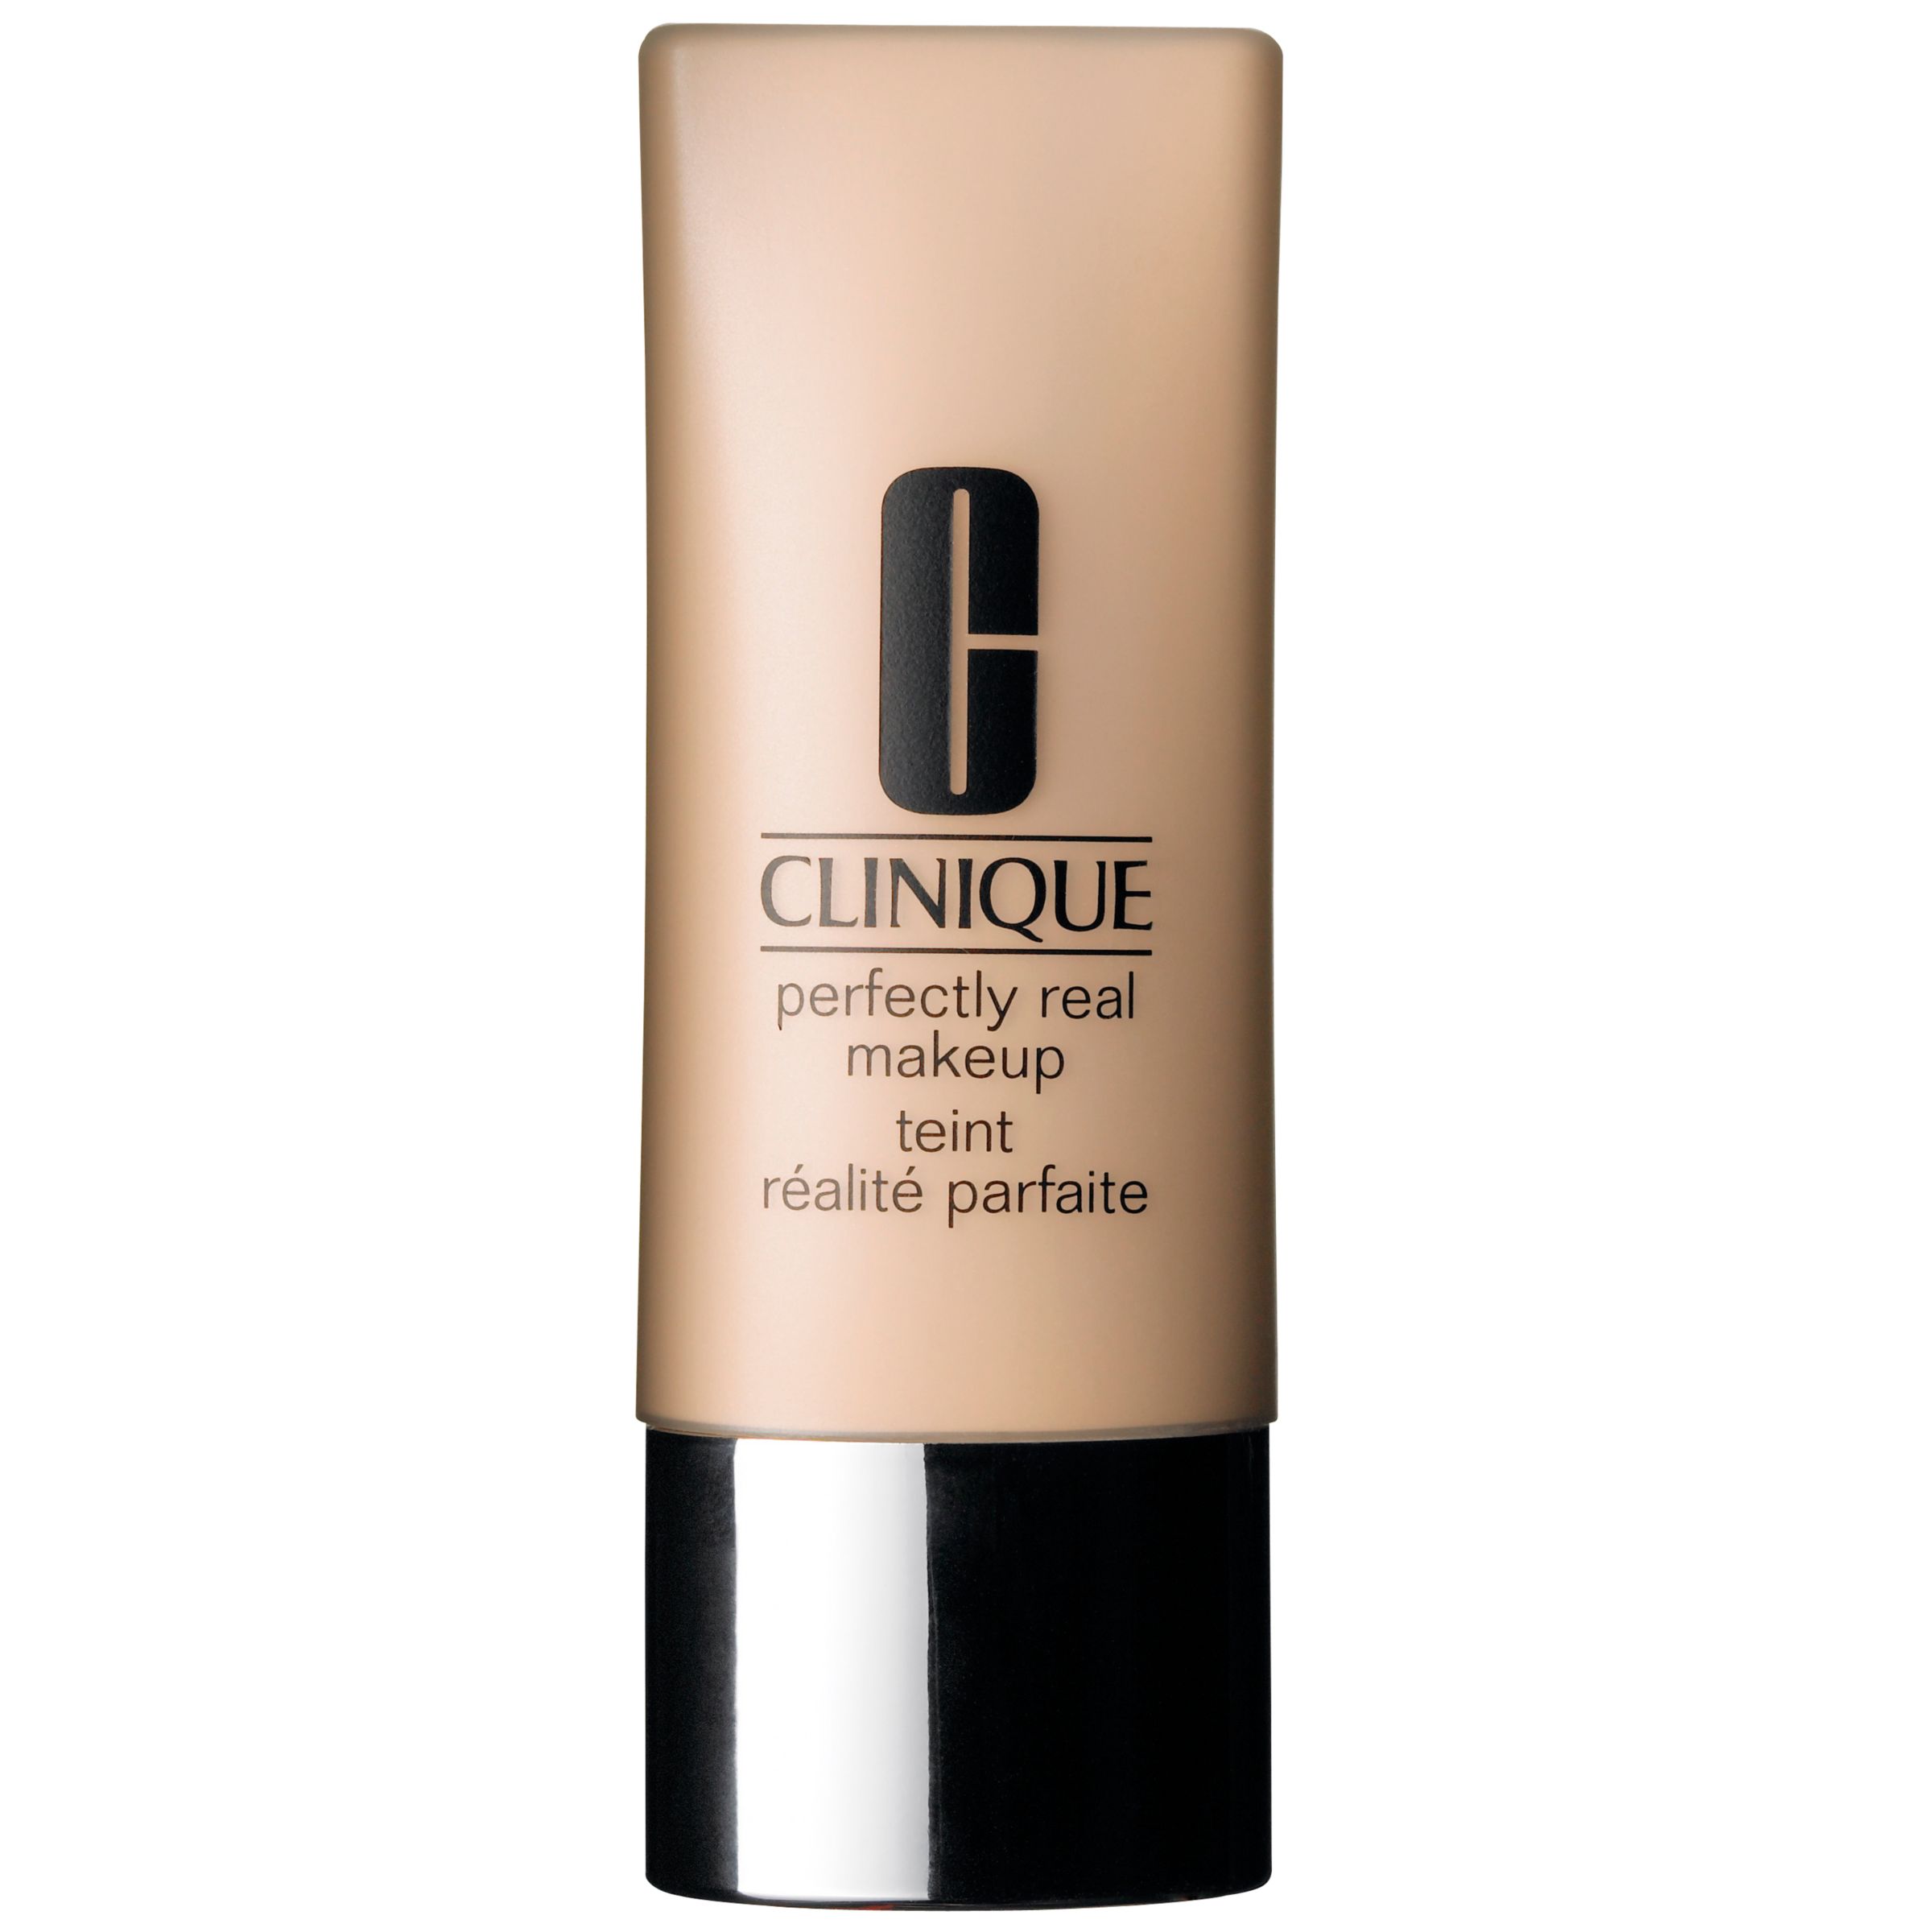 Clinique Perfectly Real Makeup Foundation - Dry Combination to Oily Combination Skin Types, 30ml